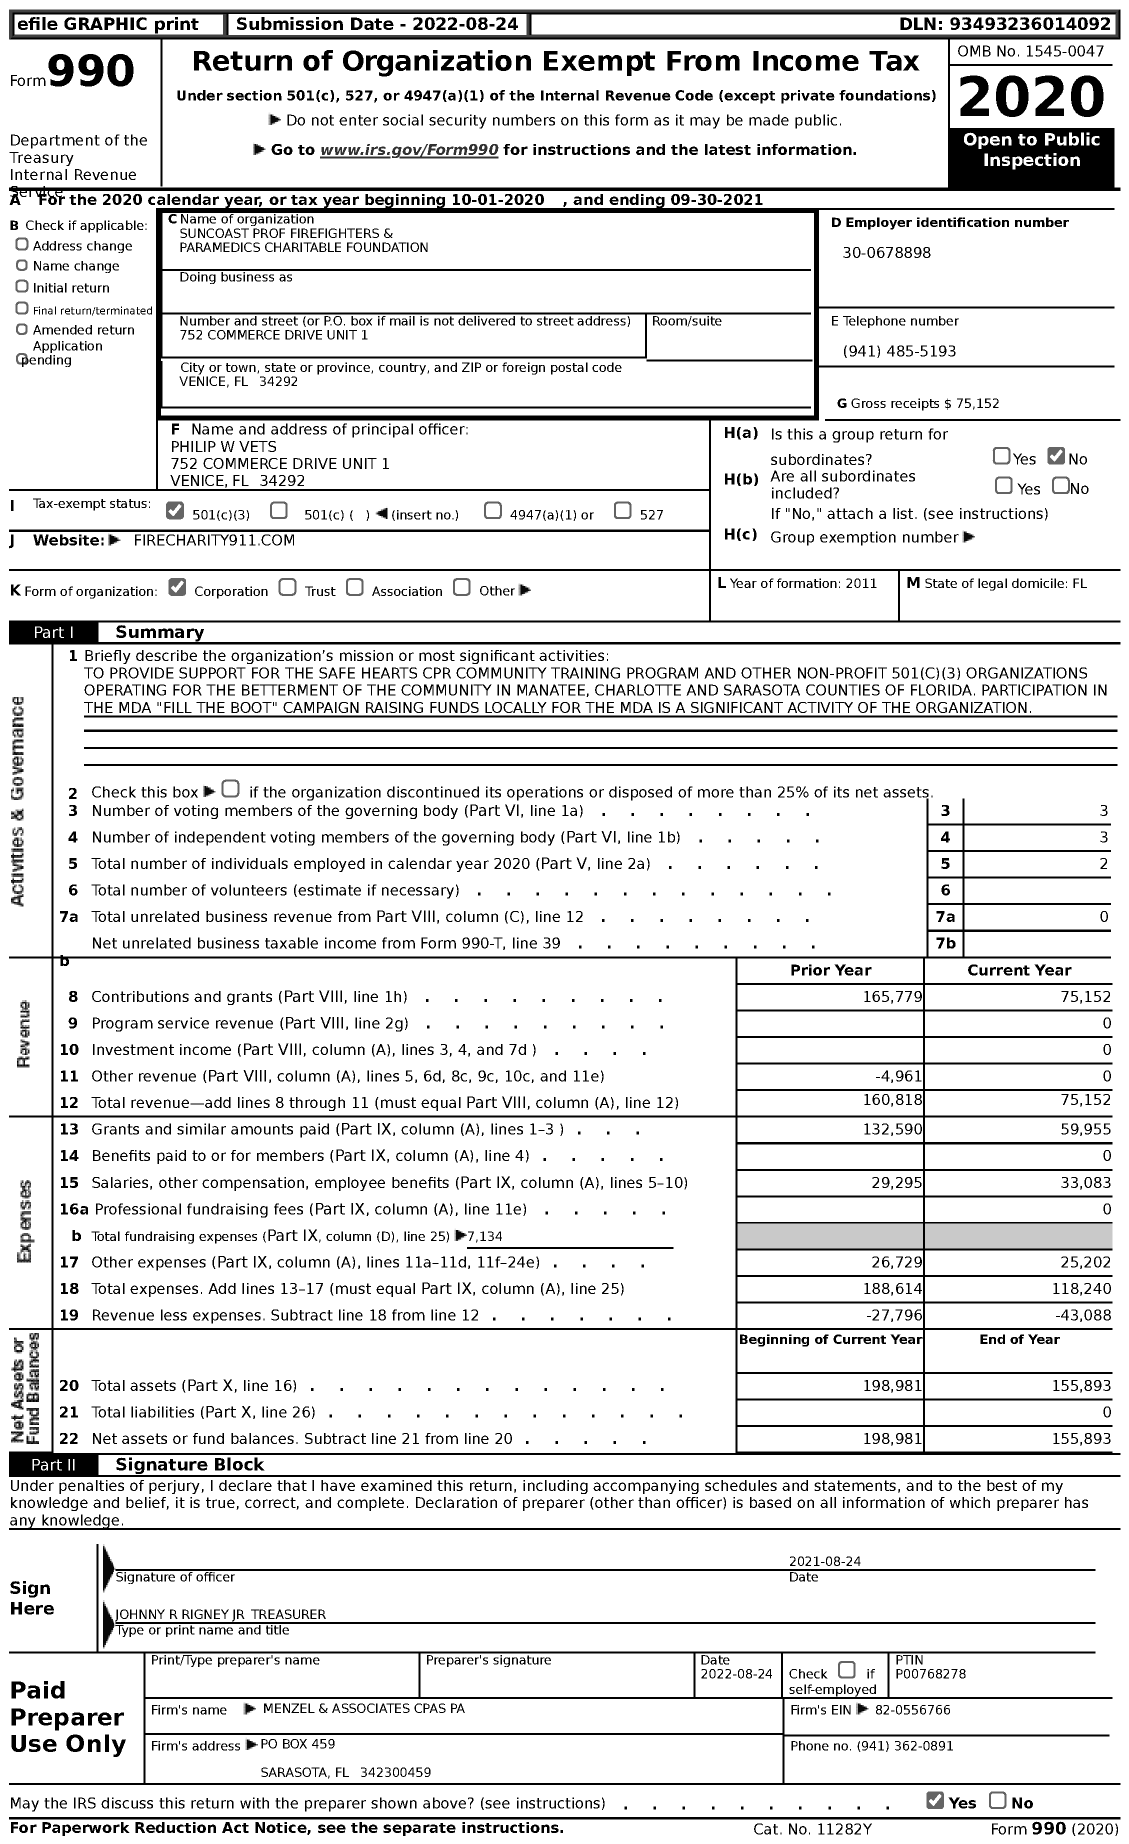 Image of first page of 2020 Form 990 for Suncoast Prof Firefighters and Paramedics Charitable Foundation